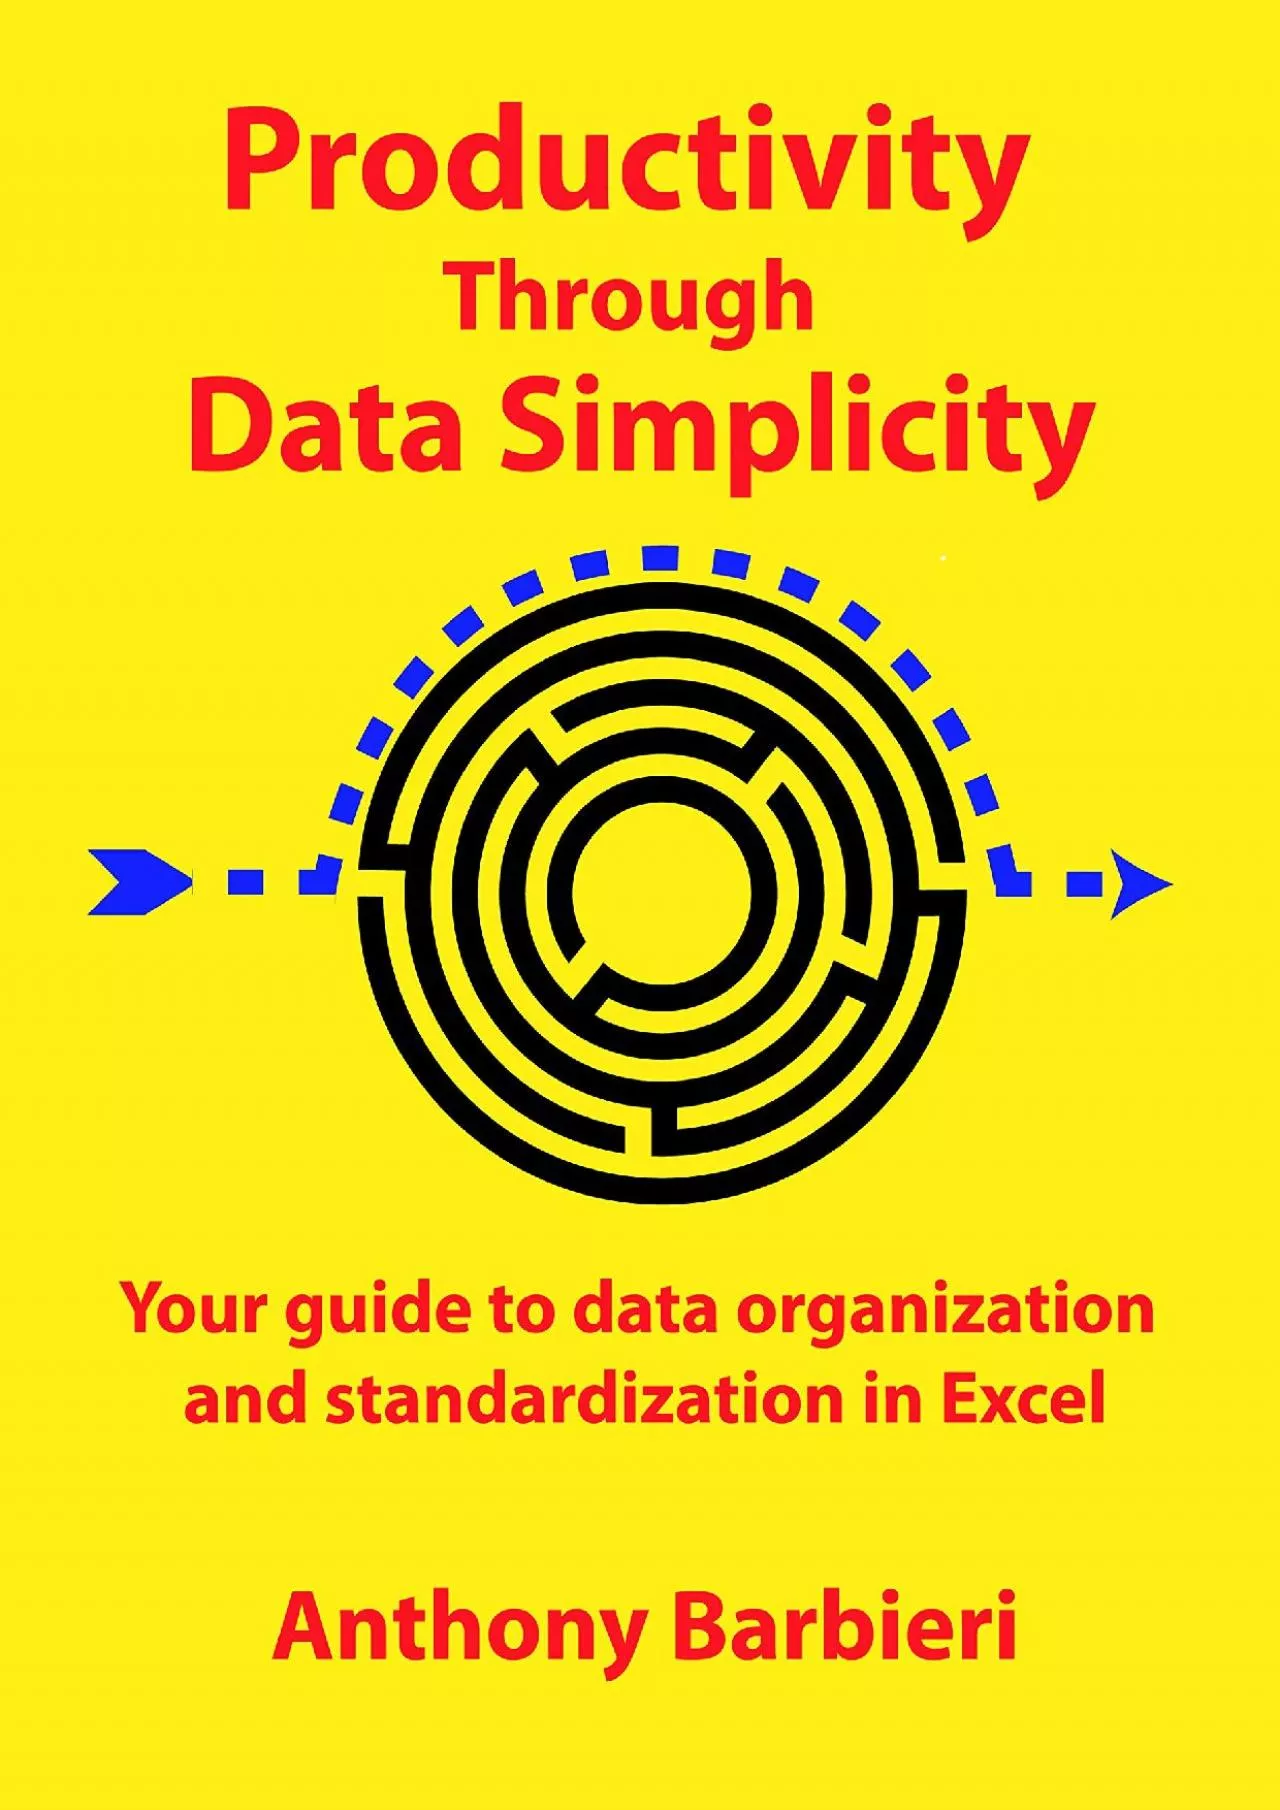 (BOOS)-Productivity Through Data Simplicity: Your guide to data organization and standardization